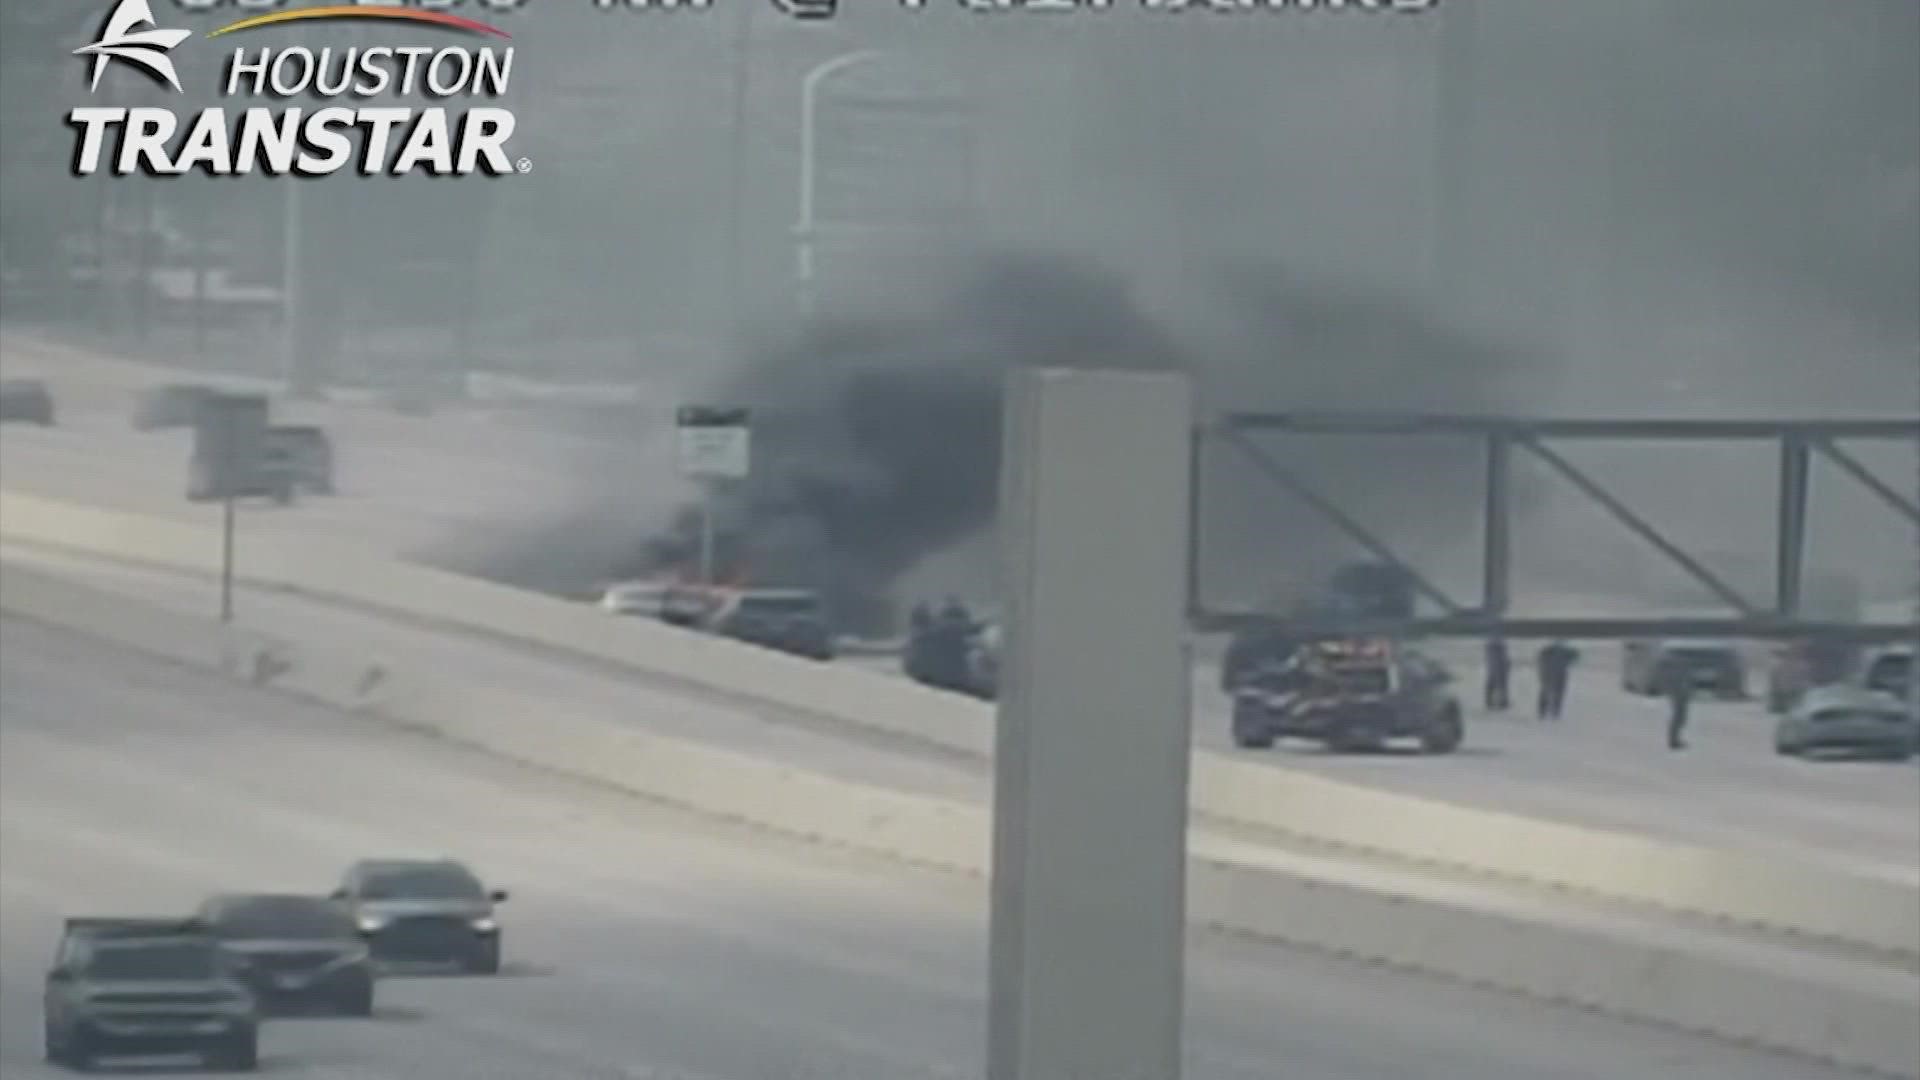 Multiple westbound lanes of Highway 290 were closed Thursday after a chase suspect's vehicle caught fire. One person was detained.